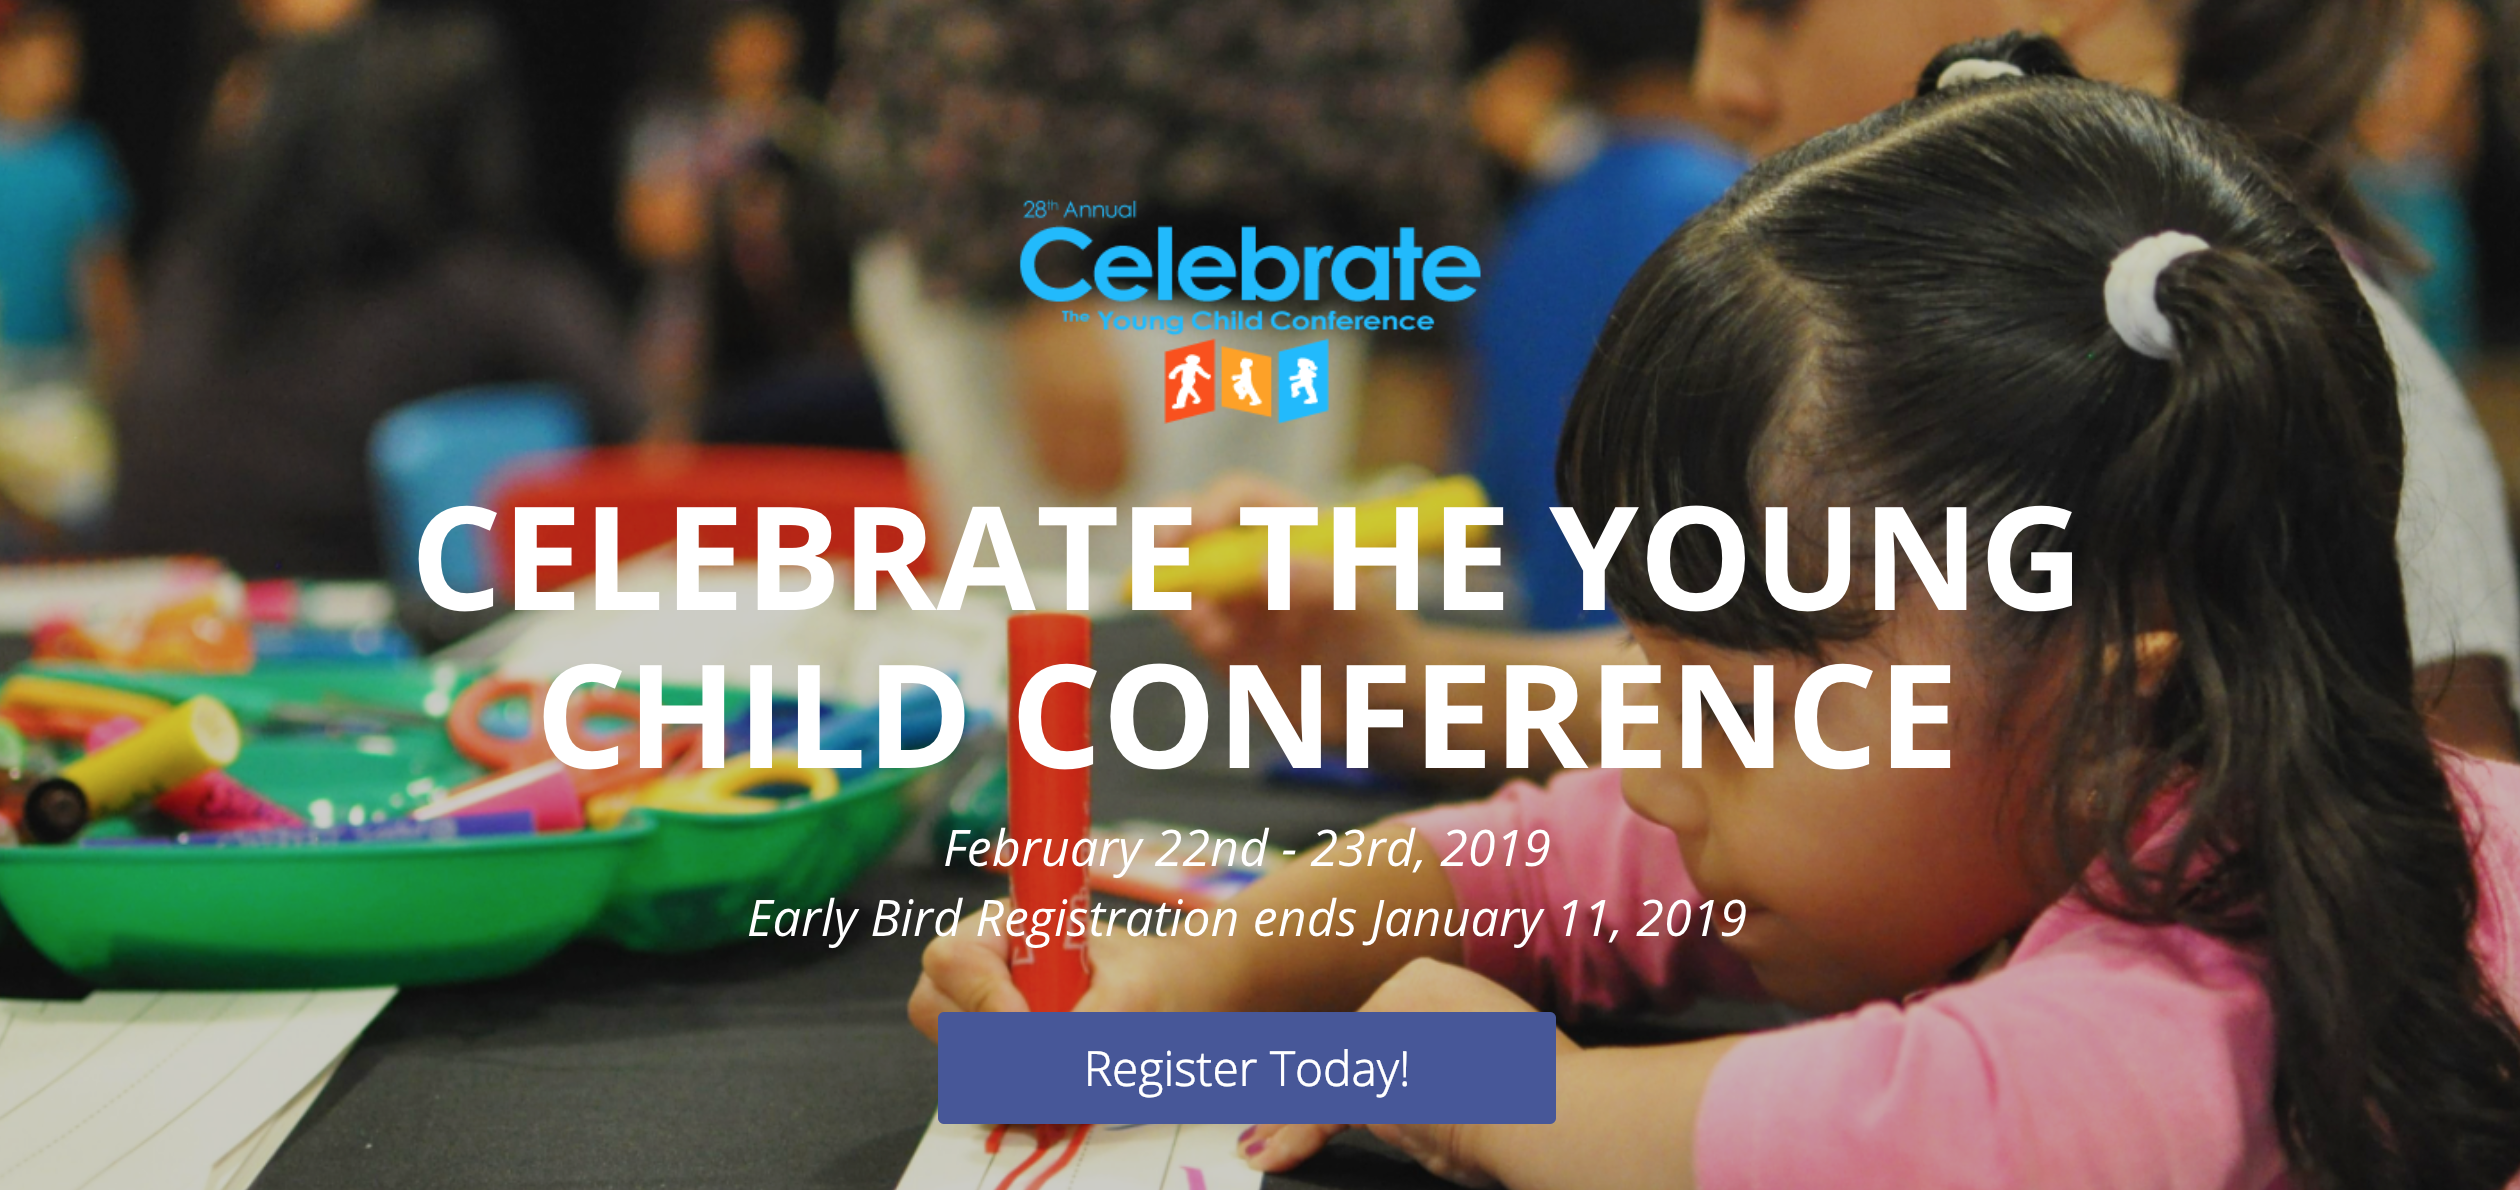 You are currently viewing 28TH ANNUAL CELEBRATE THE YOUNG CHILD CONFERENCE